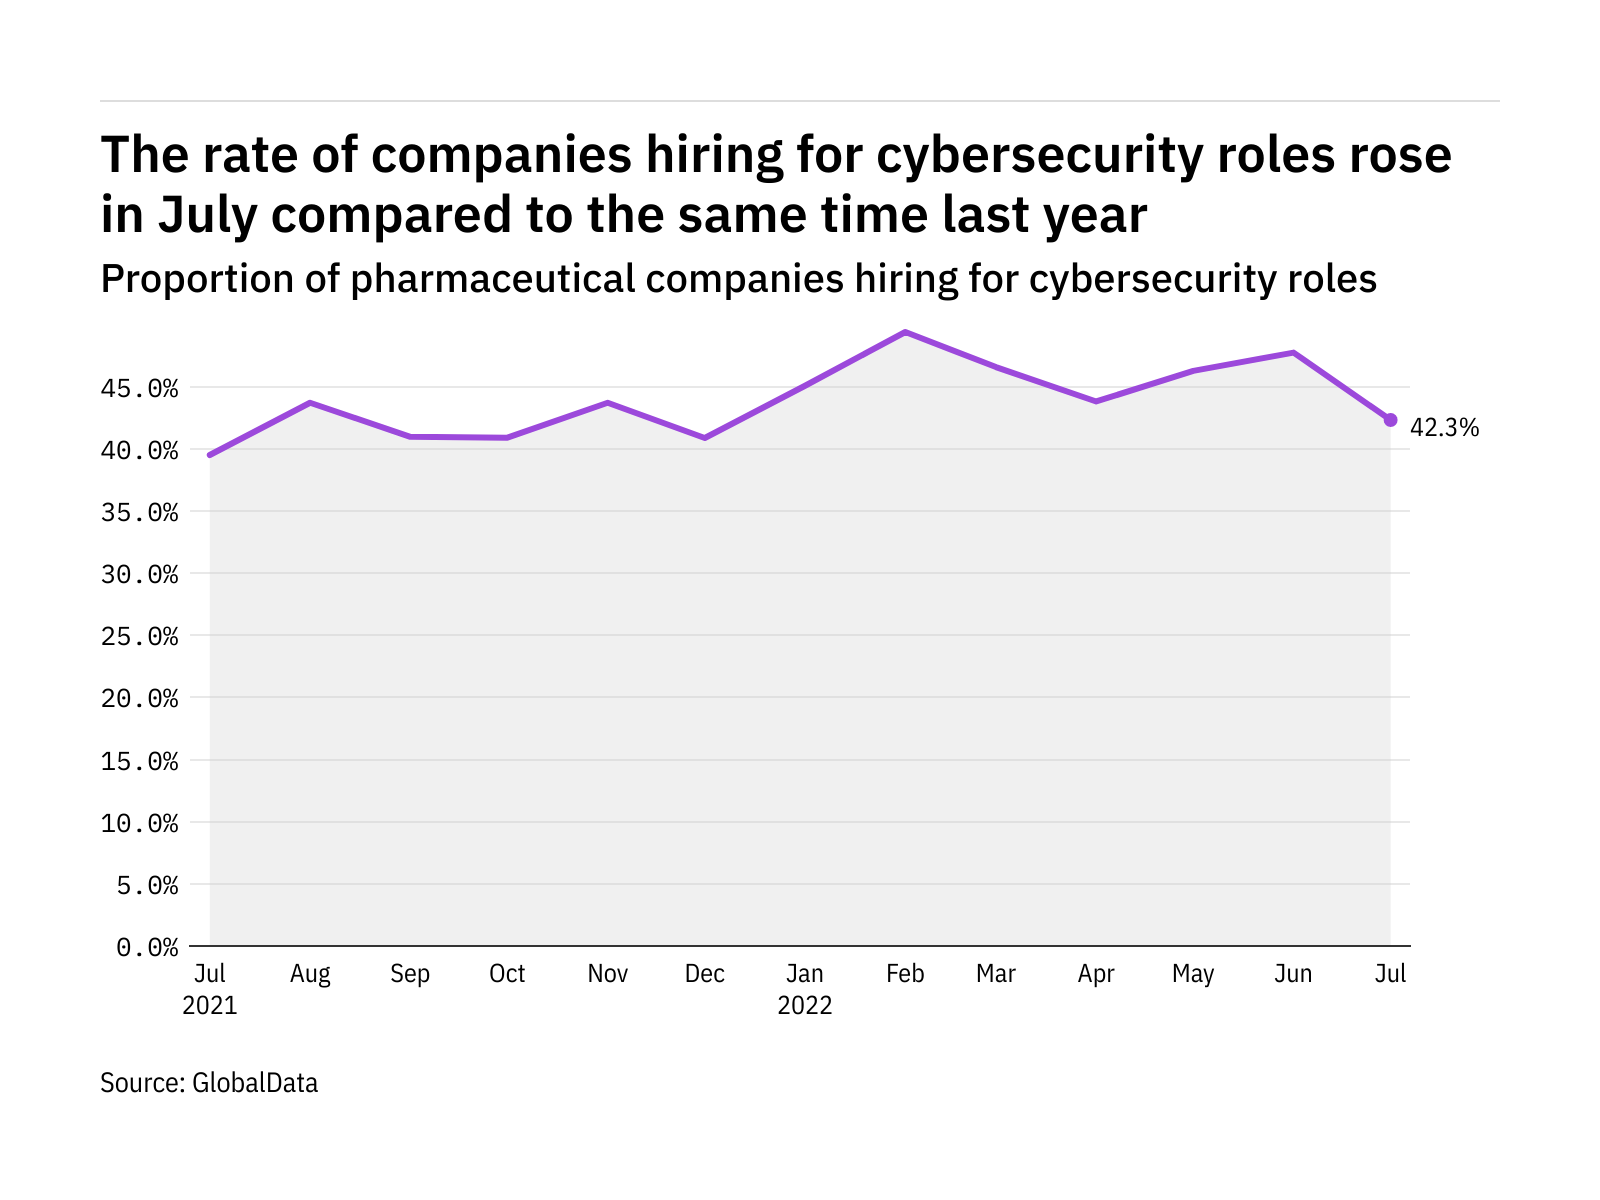 Cybersecurity hiring levels in the pharmaceutical industry rose in July 2022